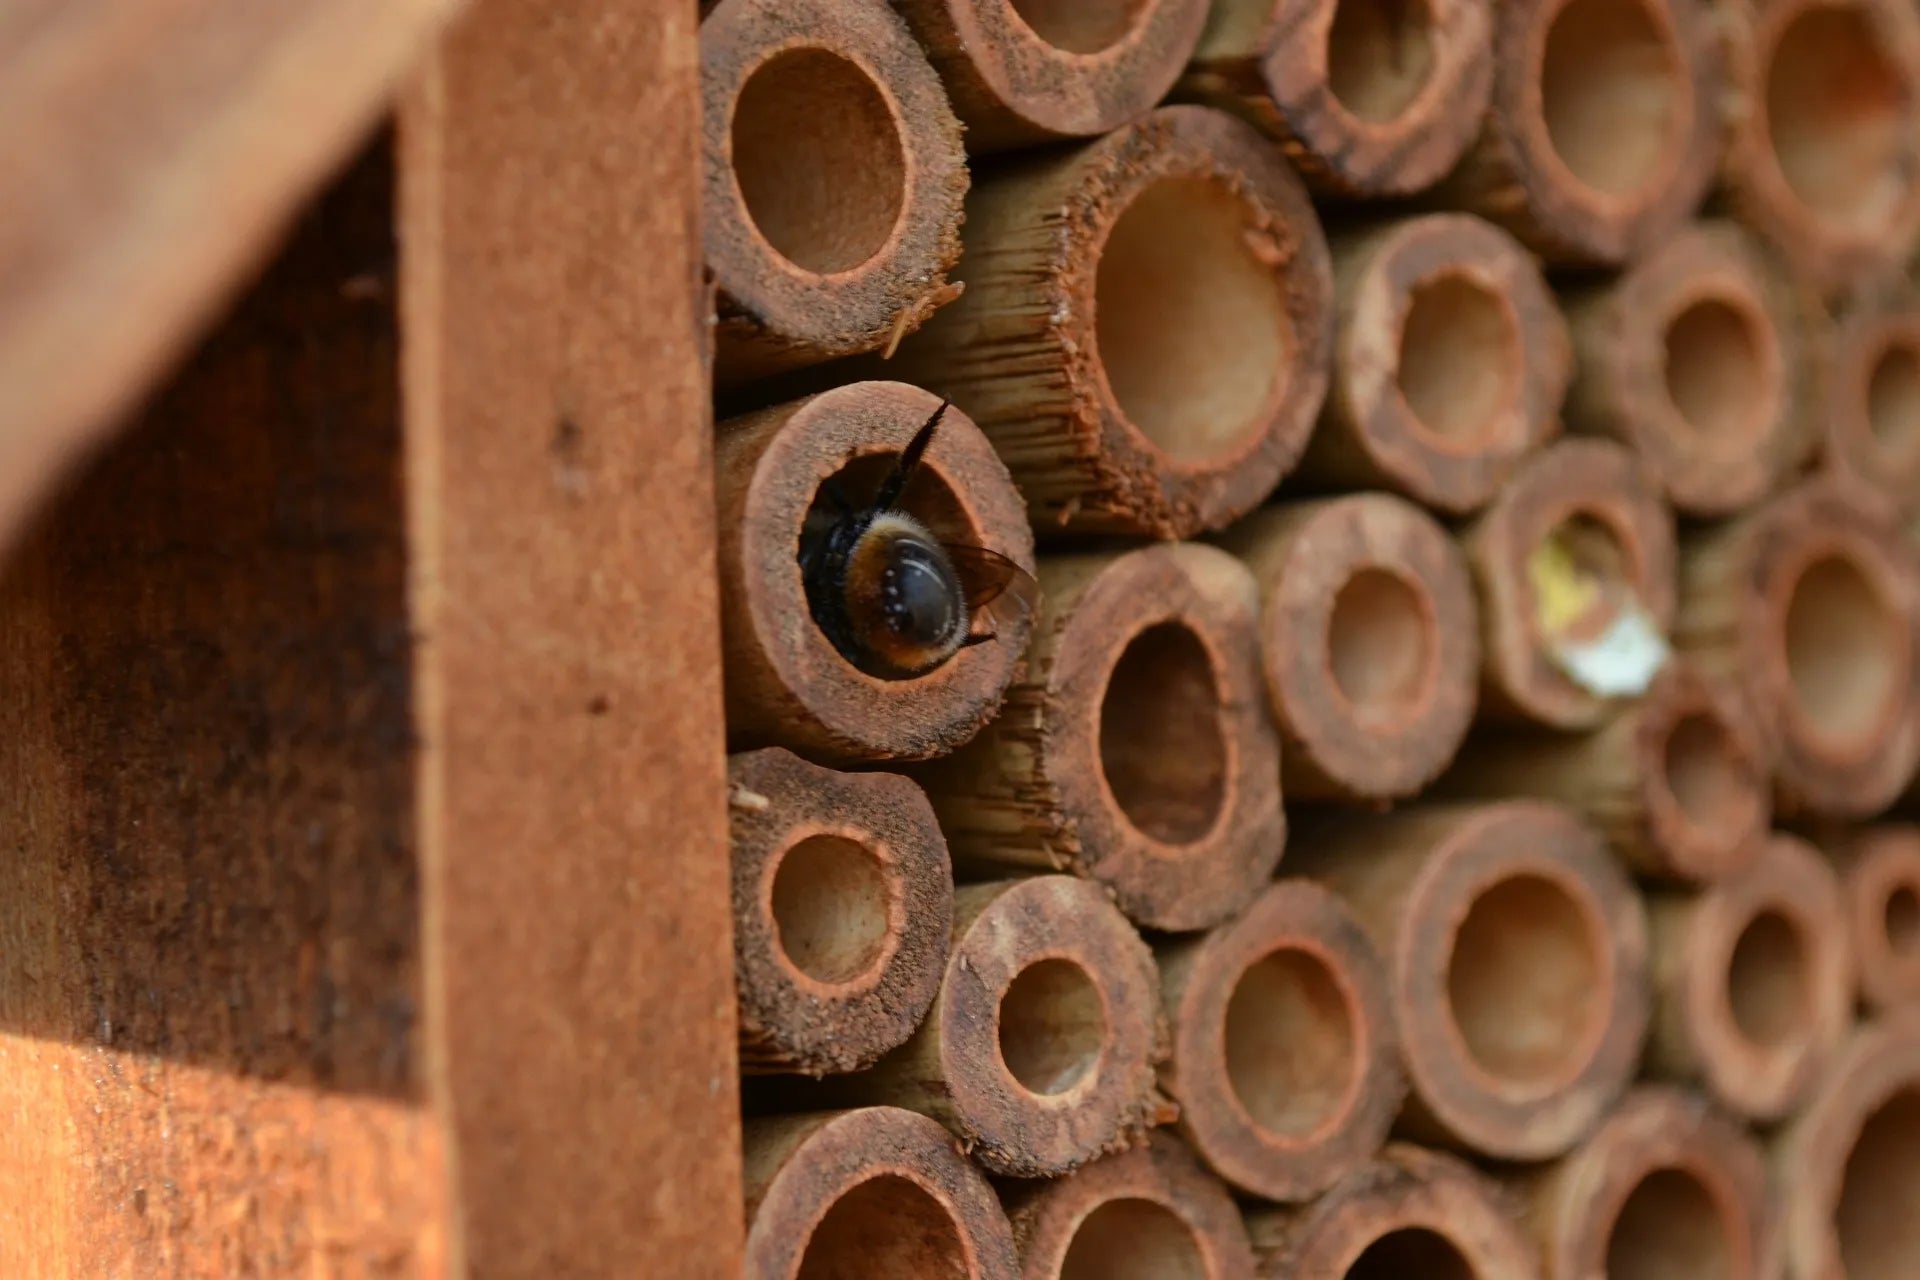 Solitary bee nesting in a bee hotel. Image by PollyDot.